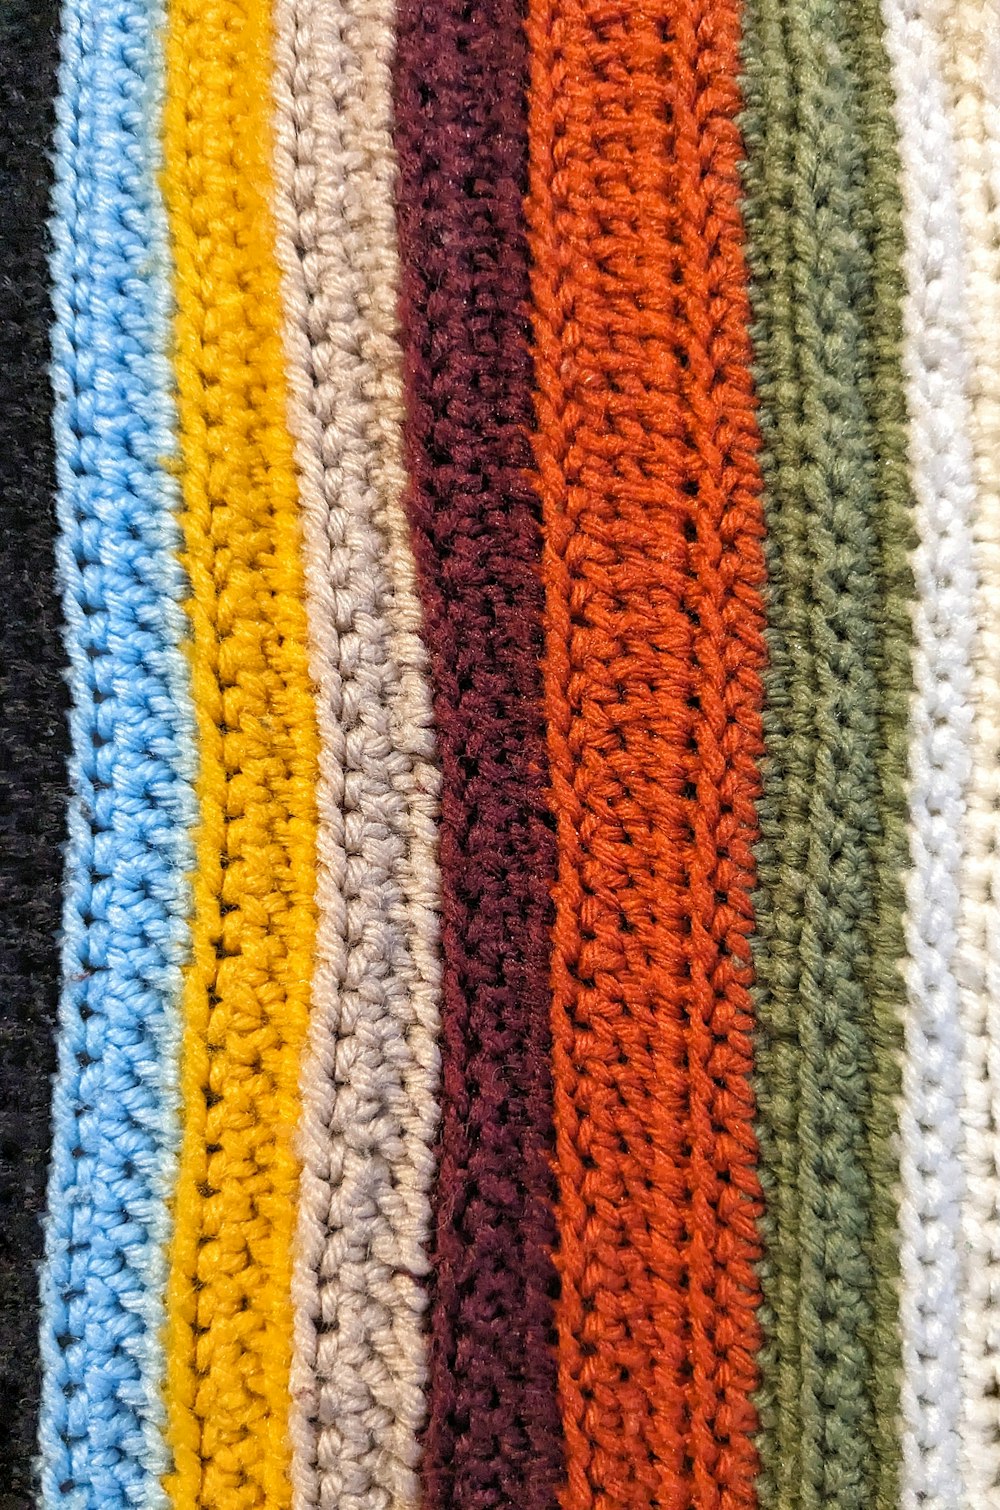 a close up of a crocheted blanket with many colors of yarn